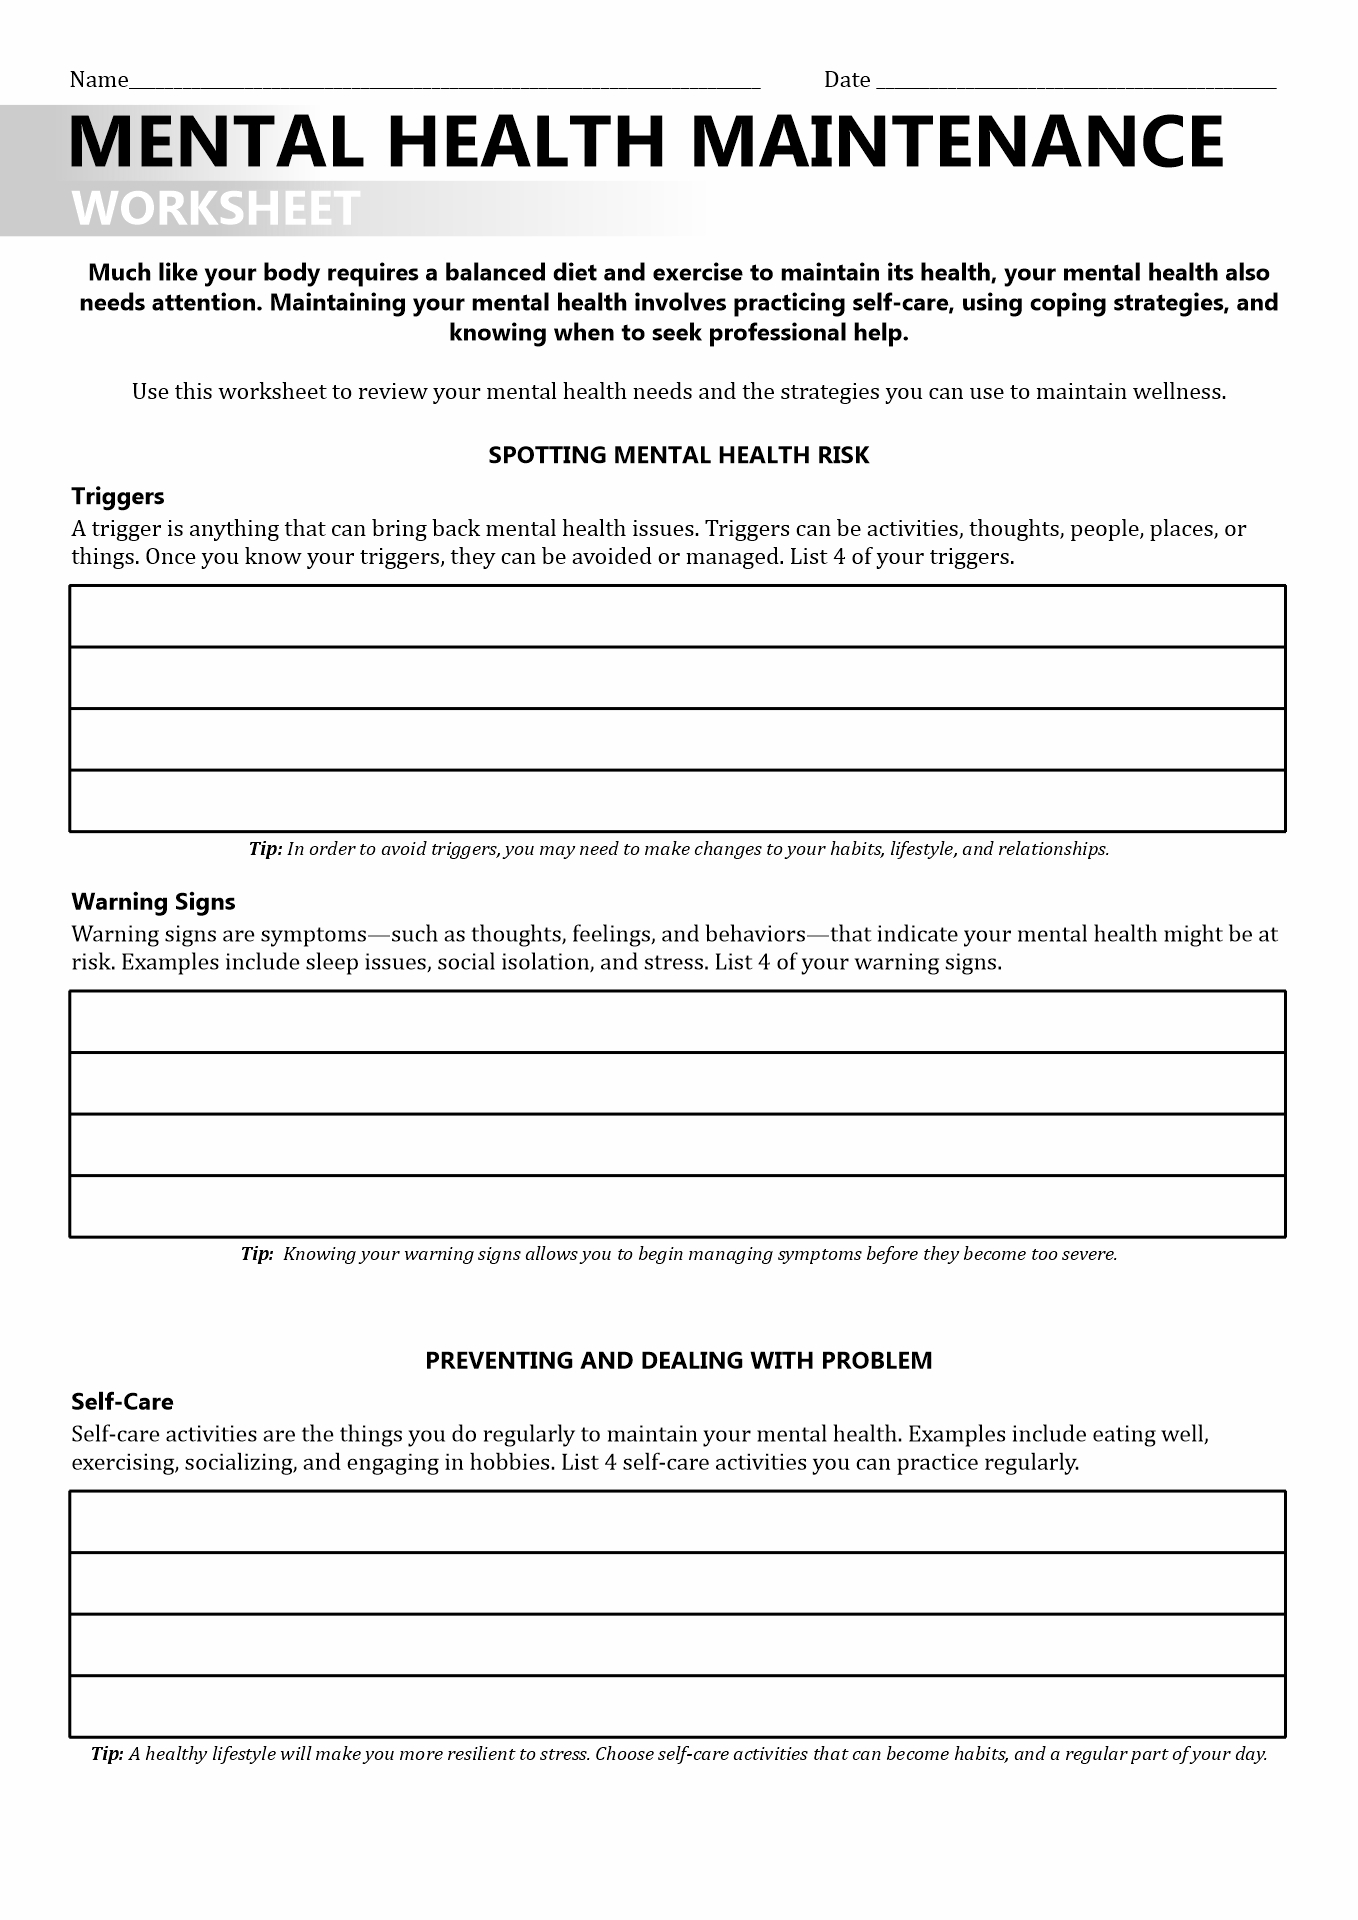 16-best-images-of-recovery-support-worksheet-early-recovery-skills-worksheets-relapse